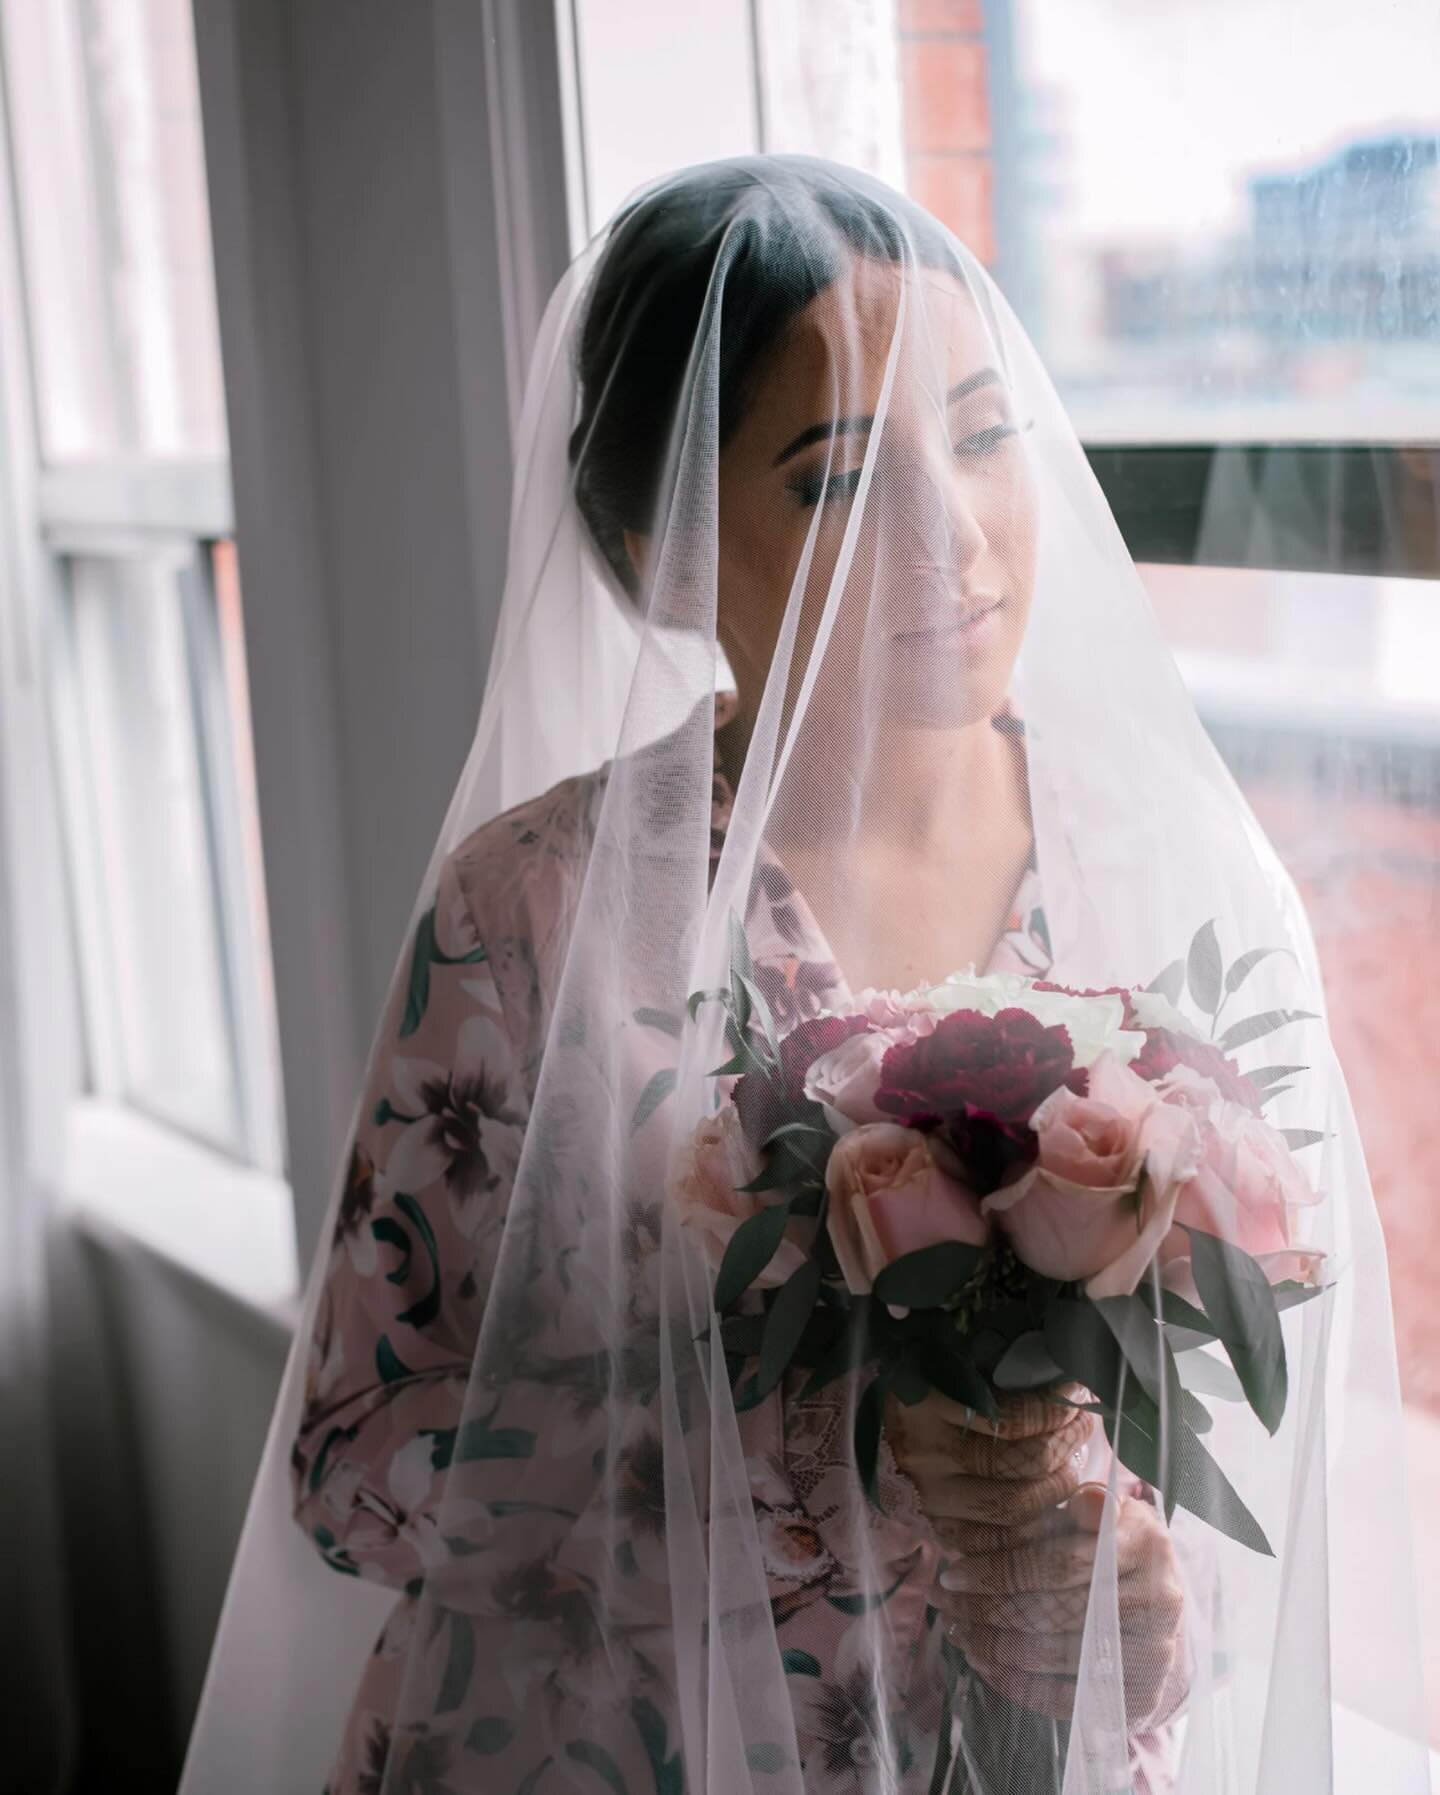 Embracing the beauty of every moment, rain or shine! The gloomy skies on this wedding day actually made for some beautiful moody imagery. Though I usually love that look of sunlight streaming through the windows I understand that is not always possib